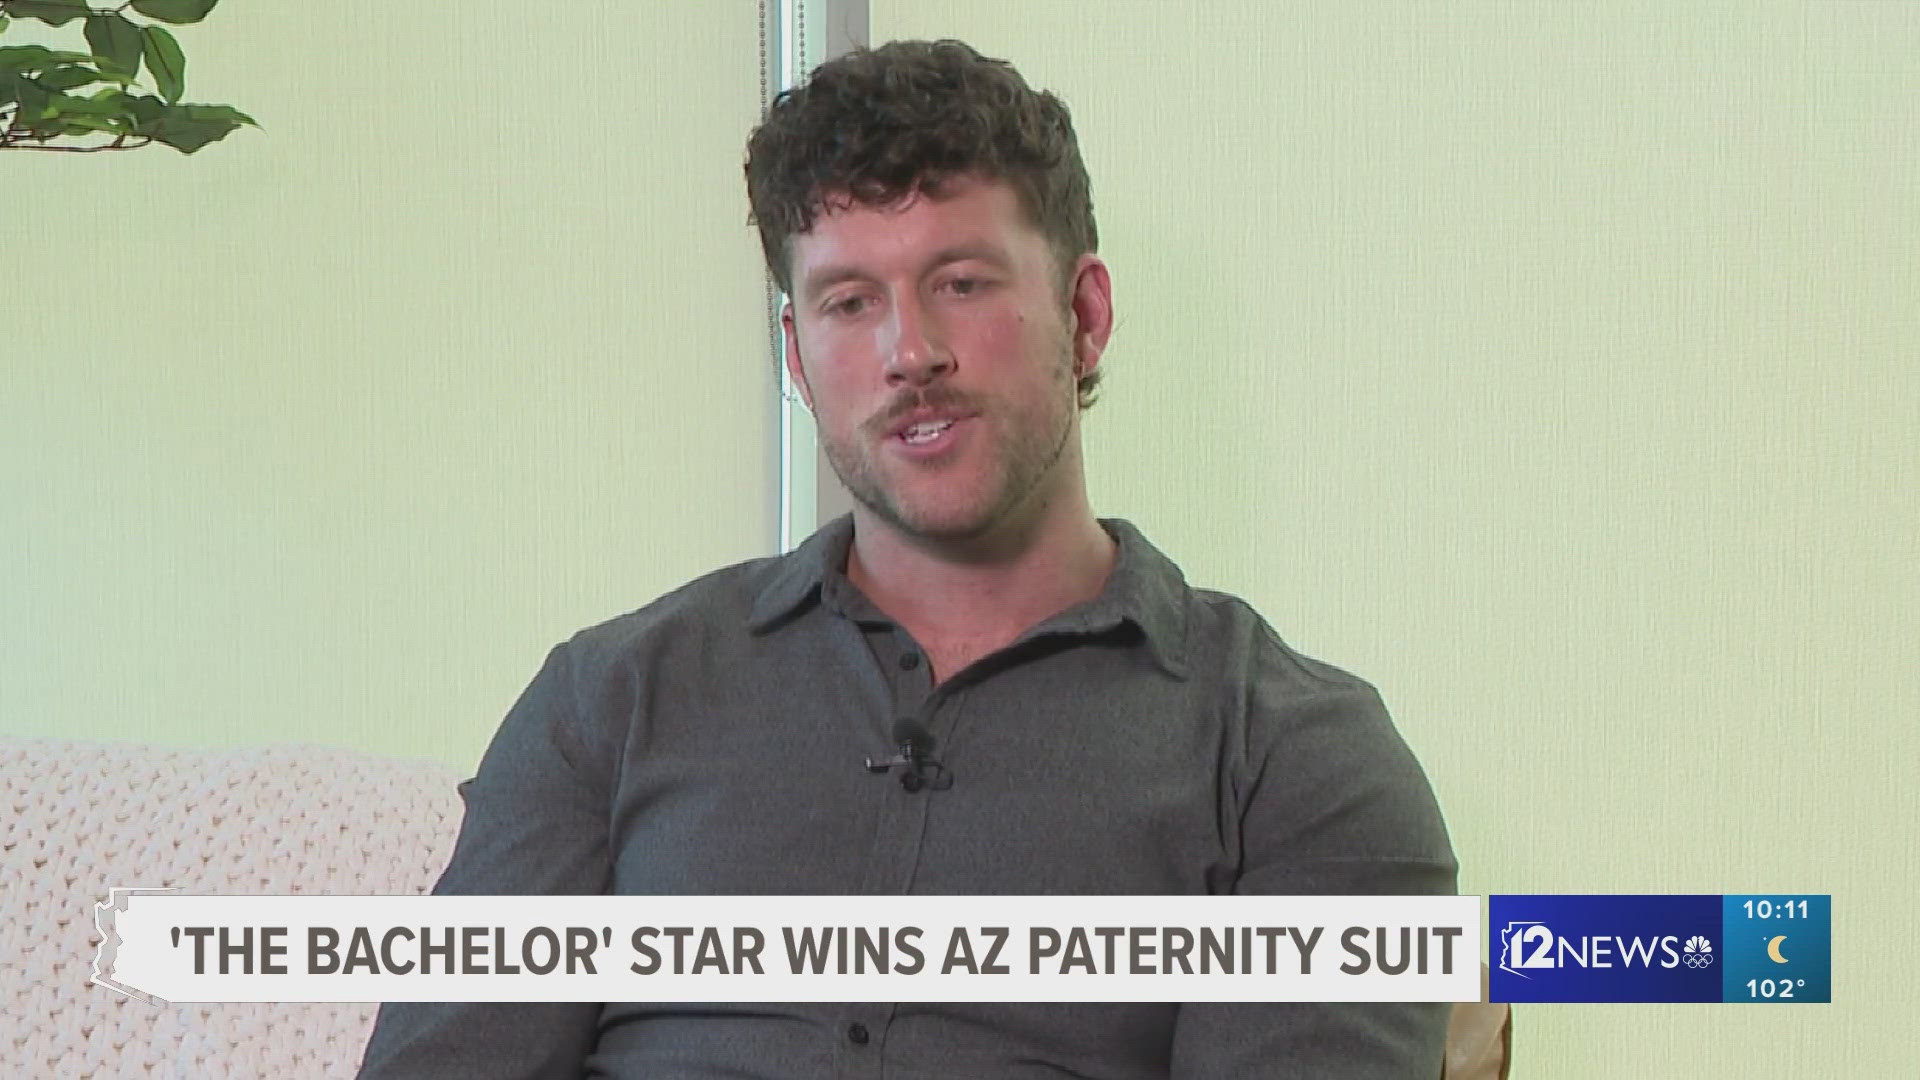 A man previously known to the world as "The Bachelor" has been fighting a paternity suit here in the Valley.